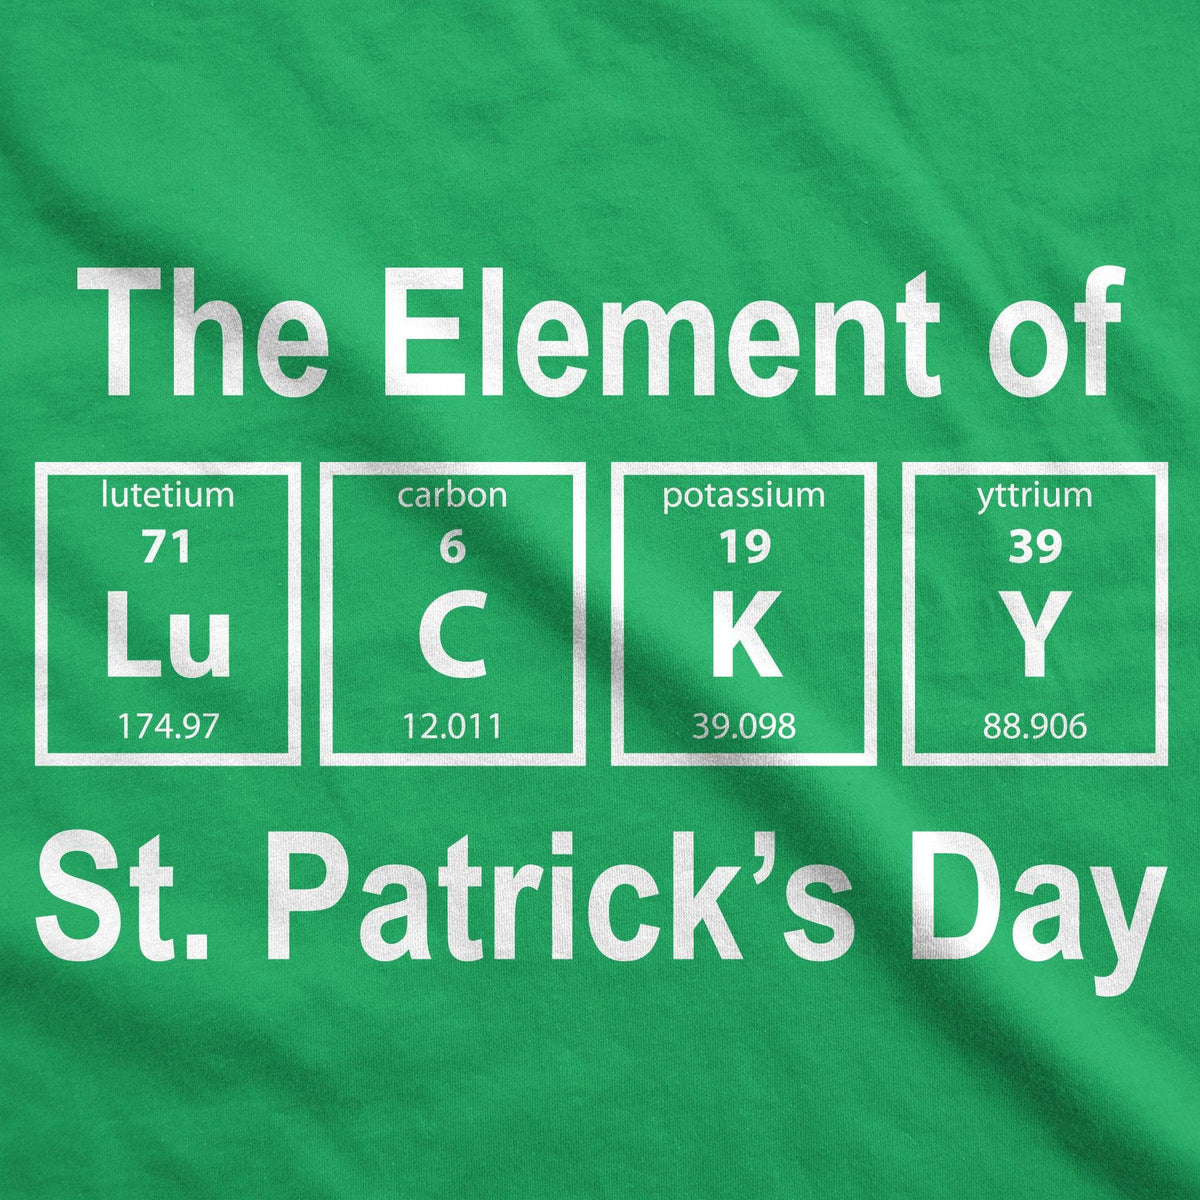 The Element Of St. Patrick&#39;s Day Men&#39;s Tshirt  -  Crazy Dog T-Shirts